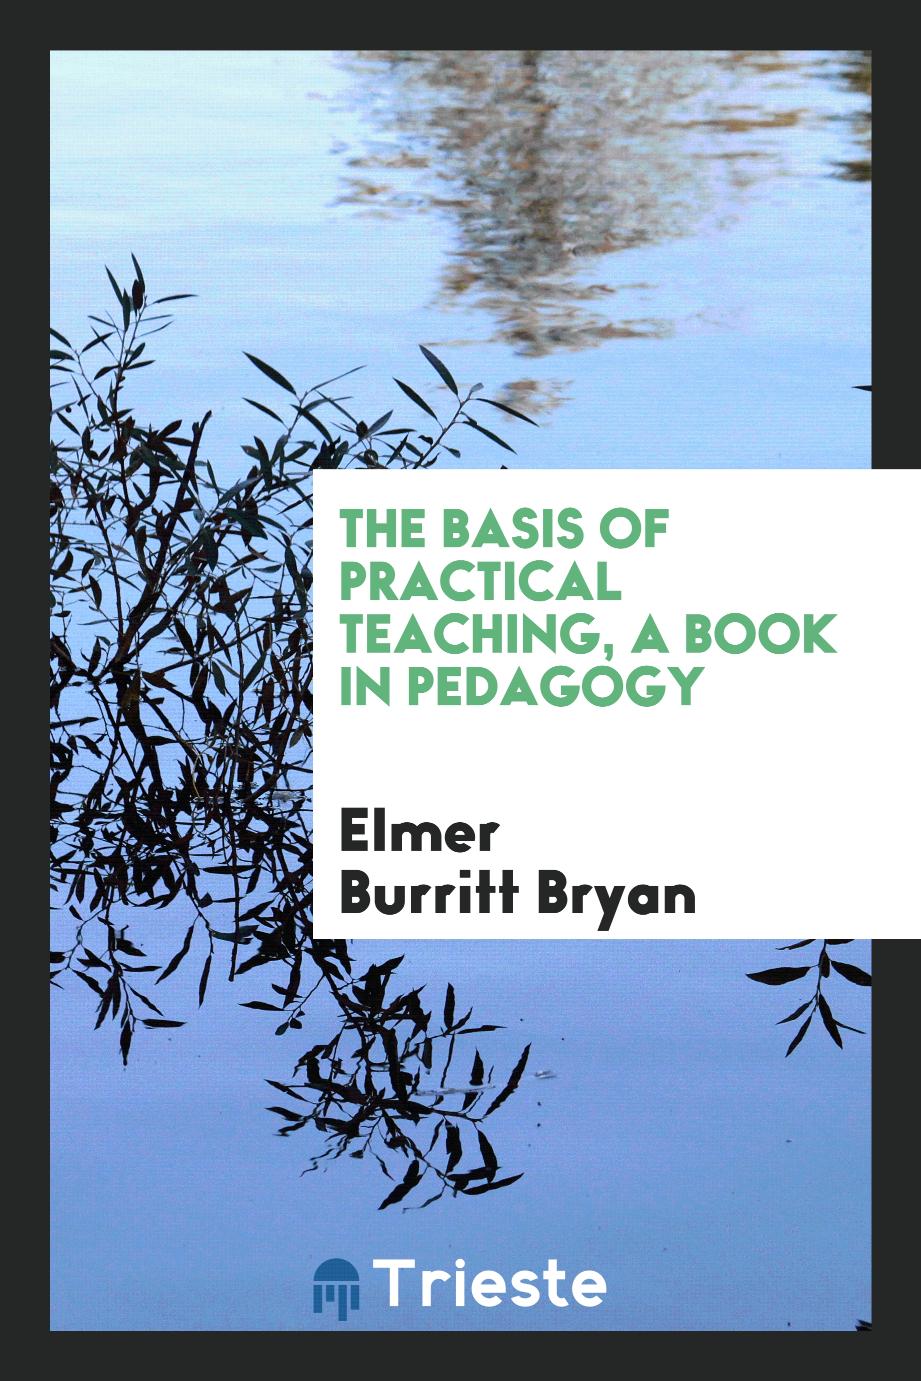 The Basis of Practical Teaching, a Book in Pedagogy